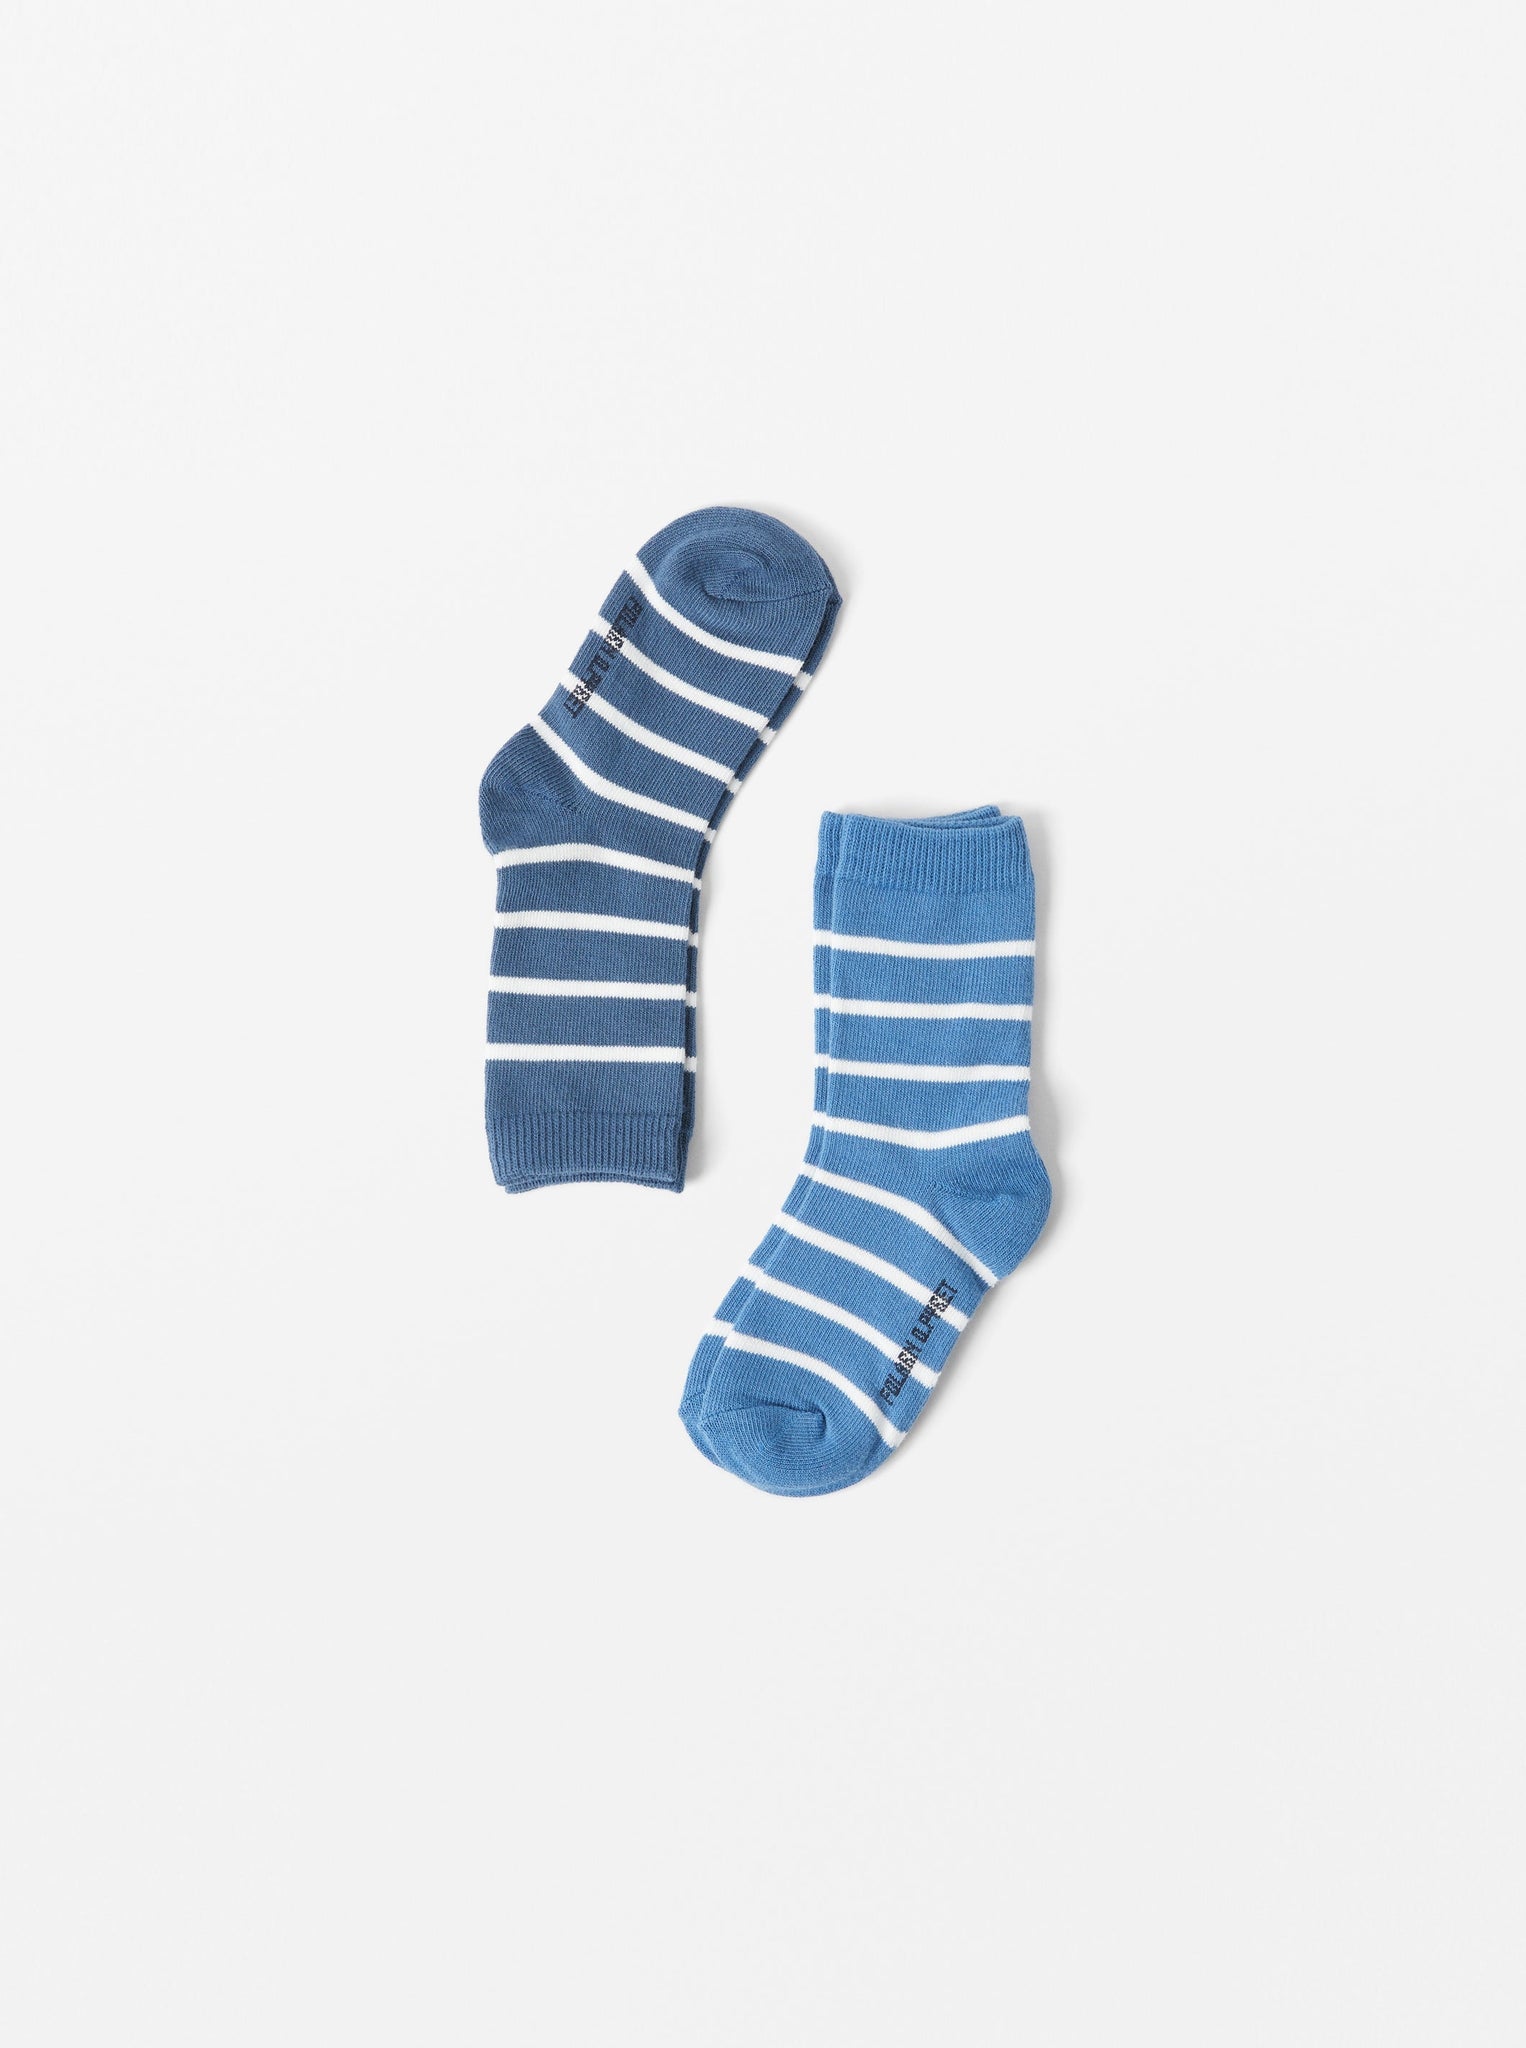 Blue Kids Socks Multipack from the Polarn O. Pyret Kidswear collection. Clothes made using sustainably sourced materials.